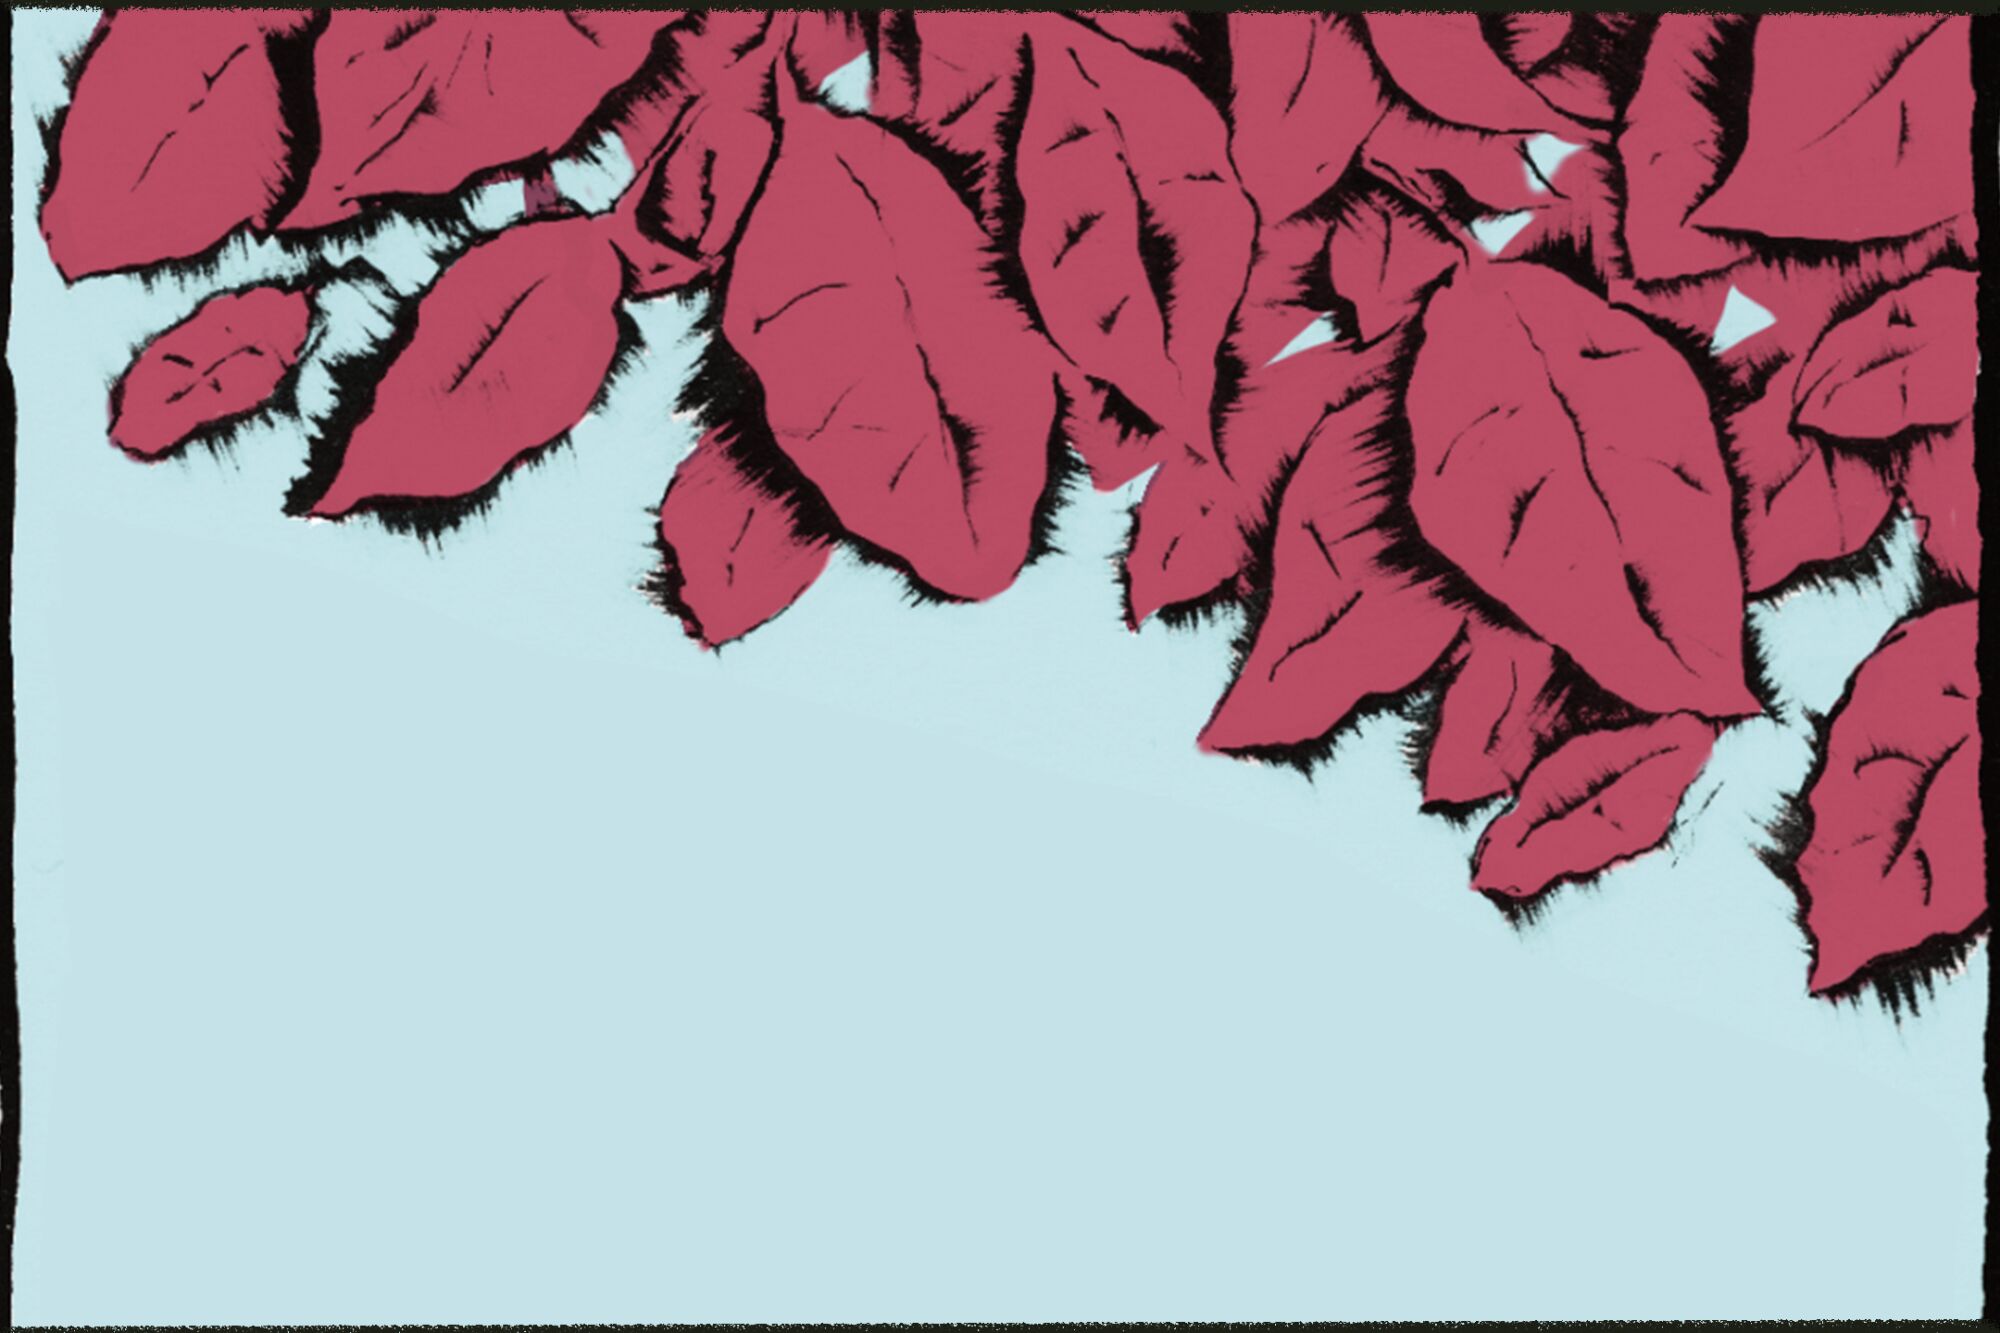 Illustration in comic-style of red leaves on a blue sky.